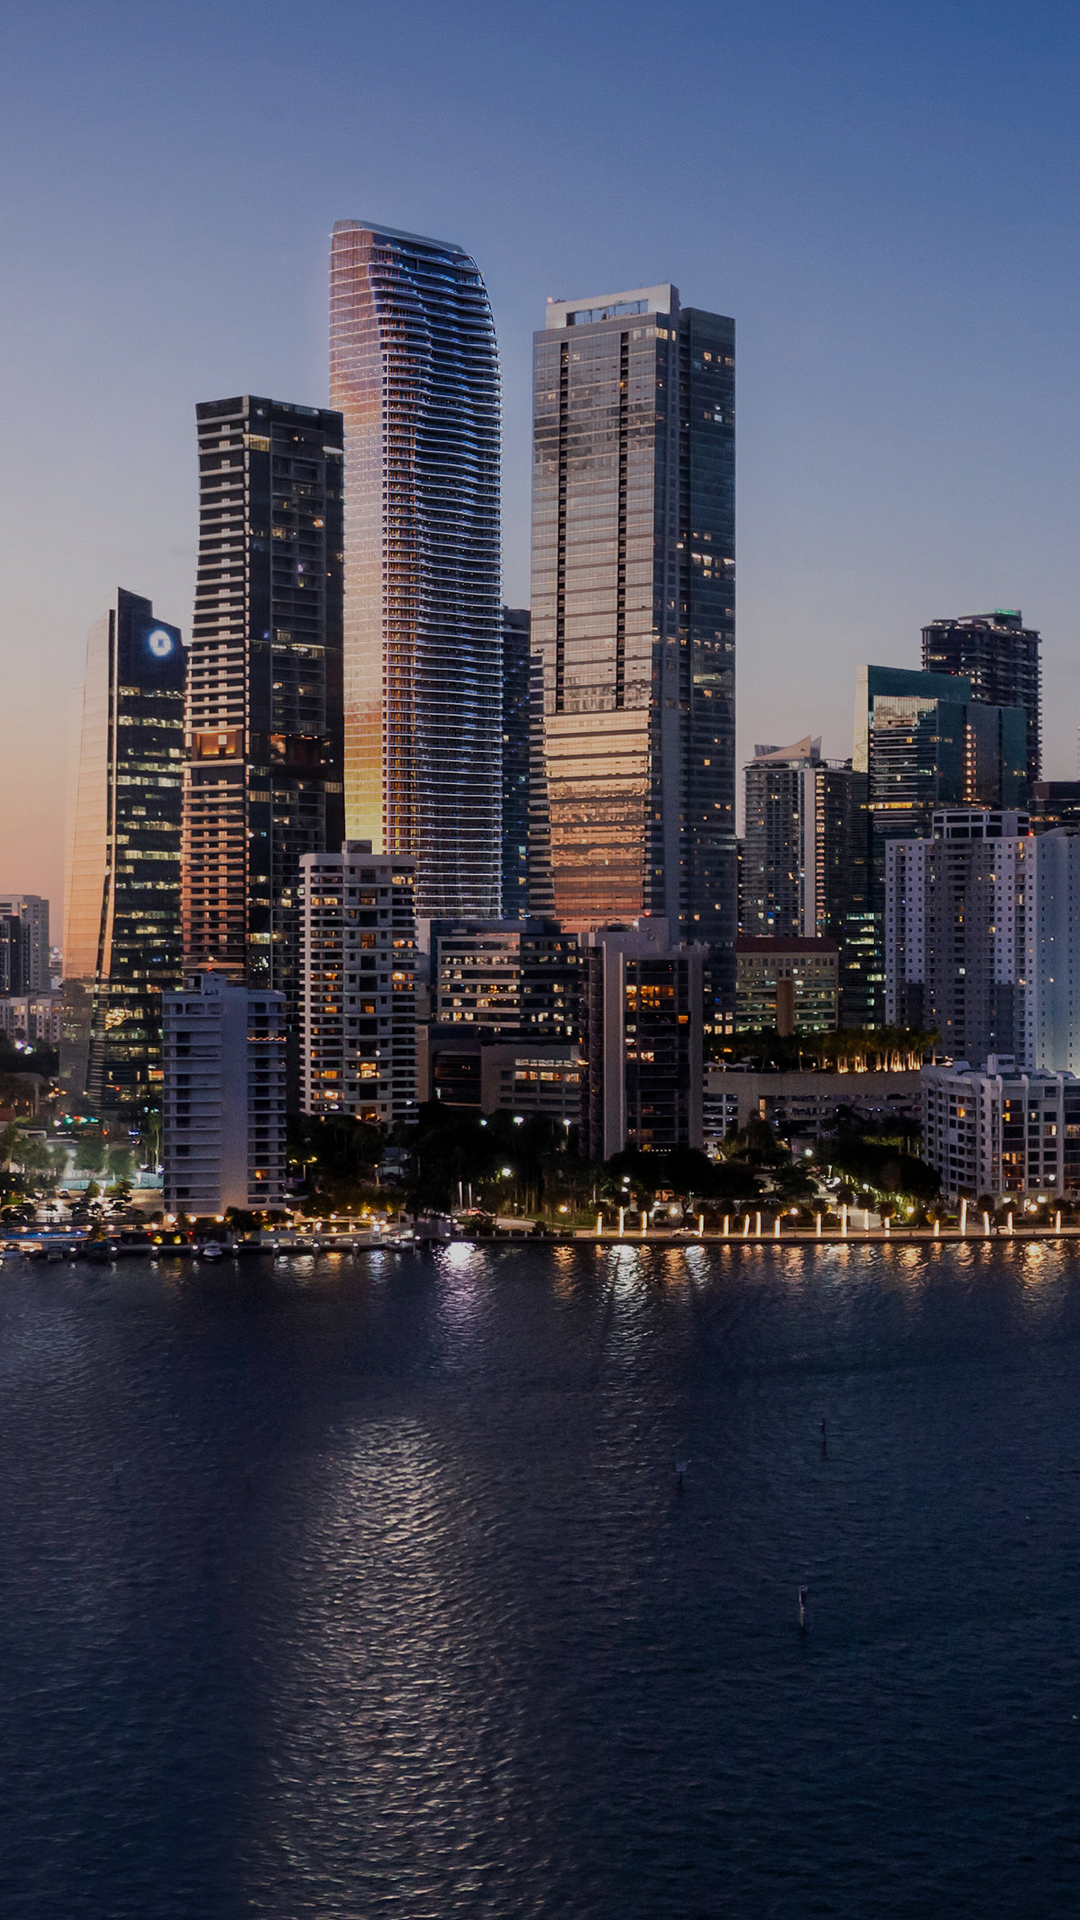 The Residences at 1428 Brickell